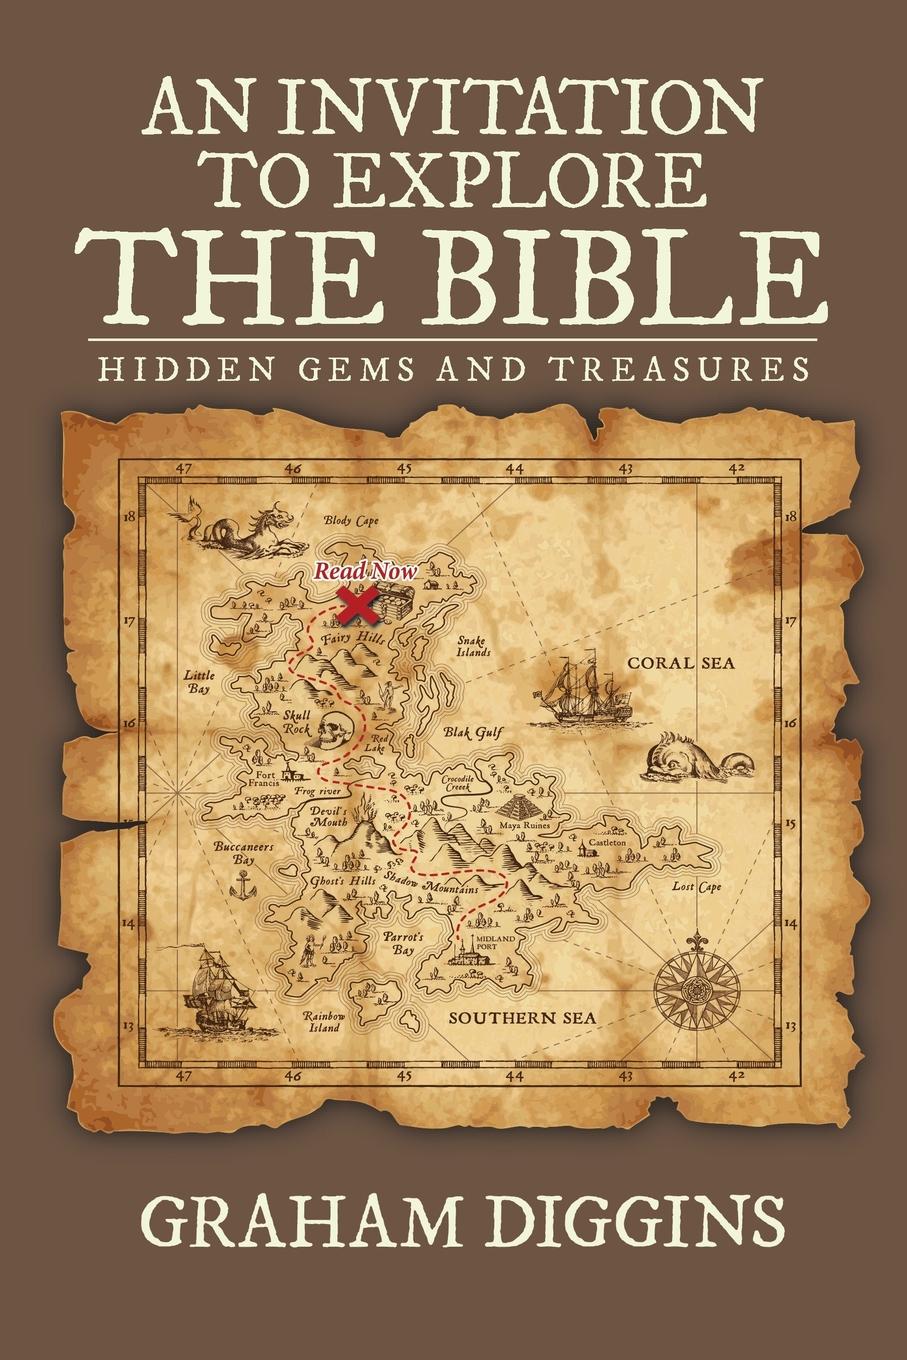 An Invitation to Explore the Bible. Hidden Gems and Treasures